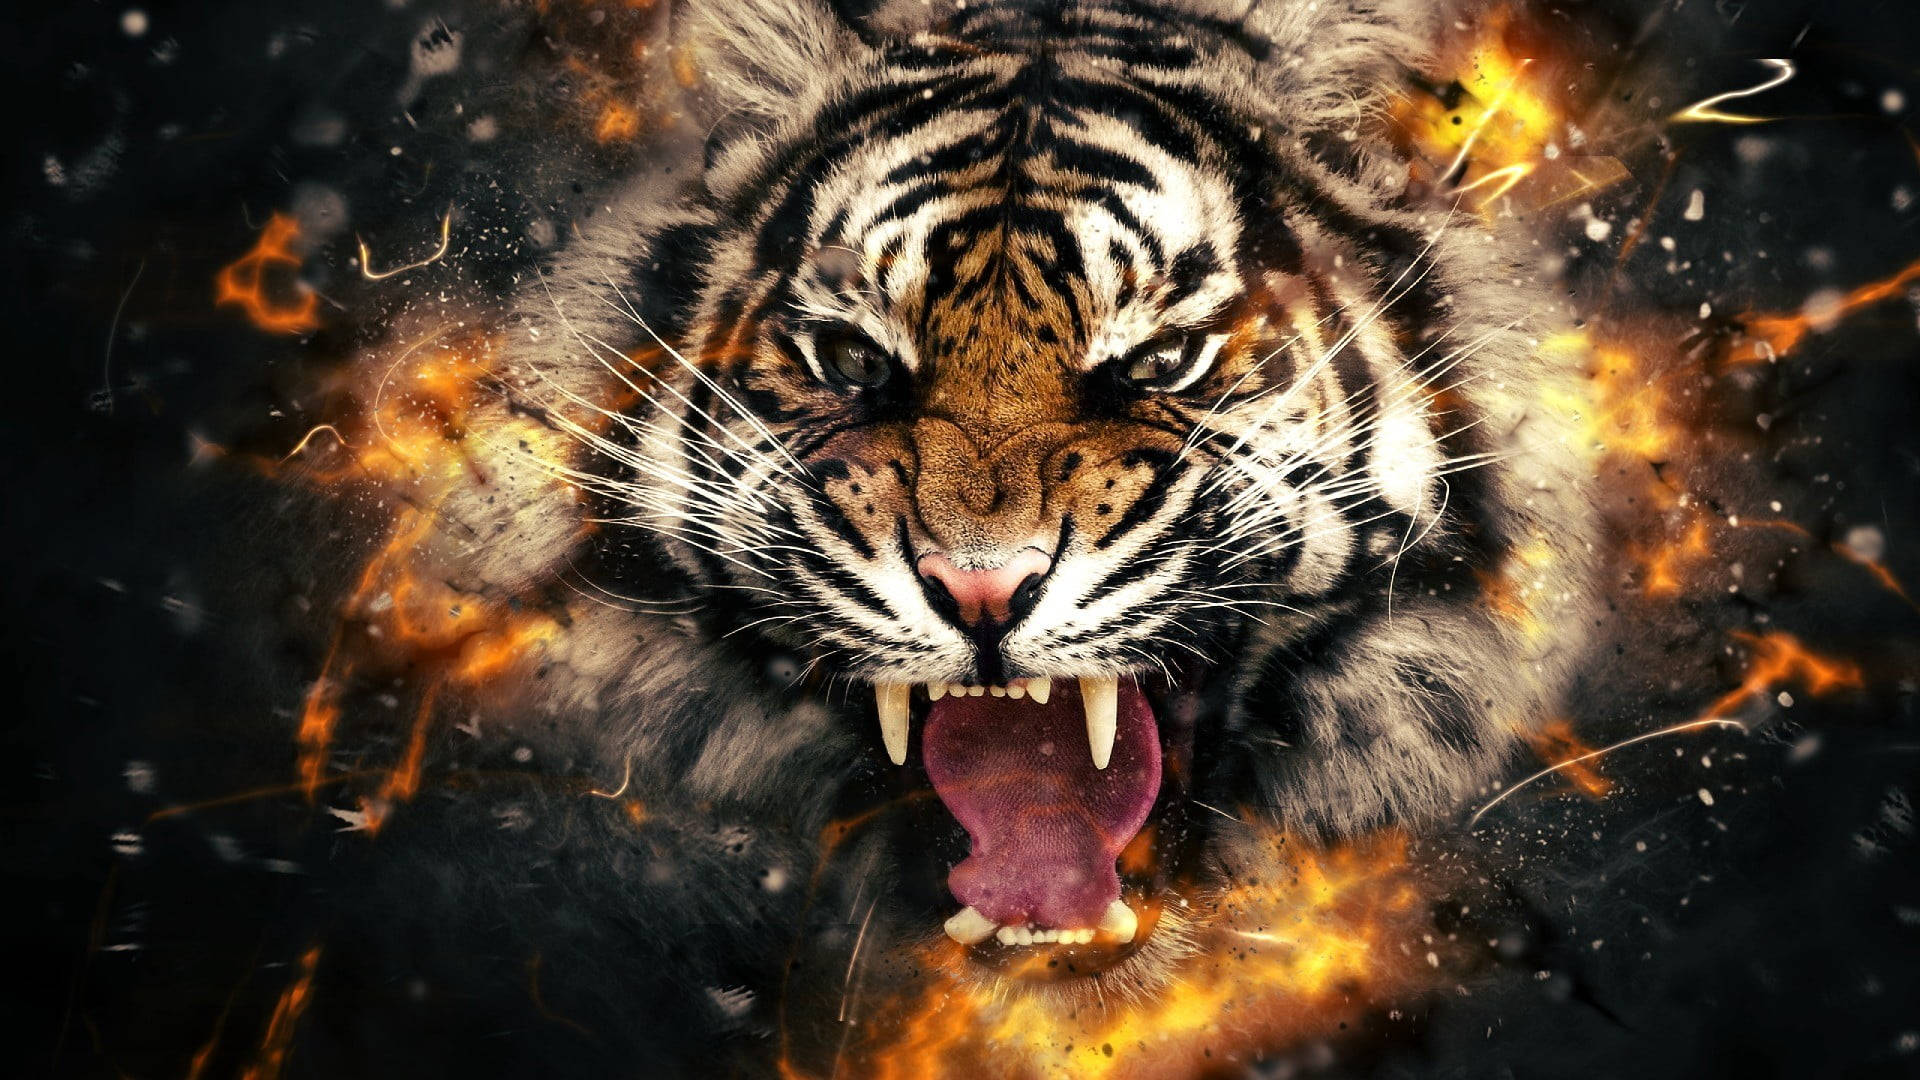 Harimau Face With Fire Wallpaper